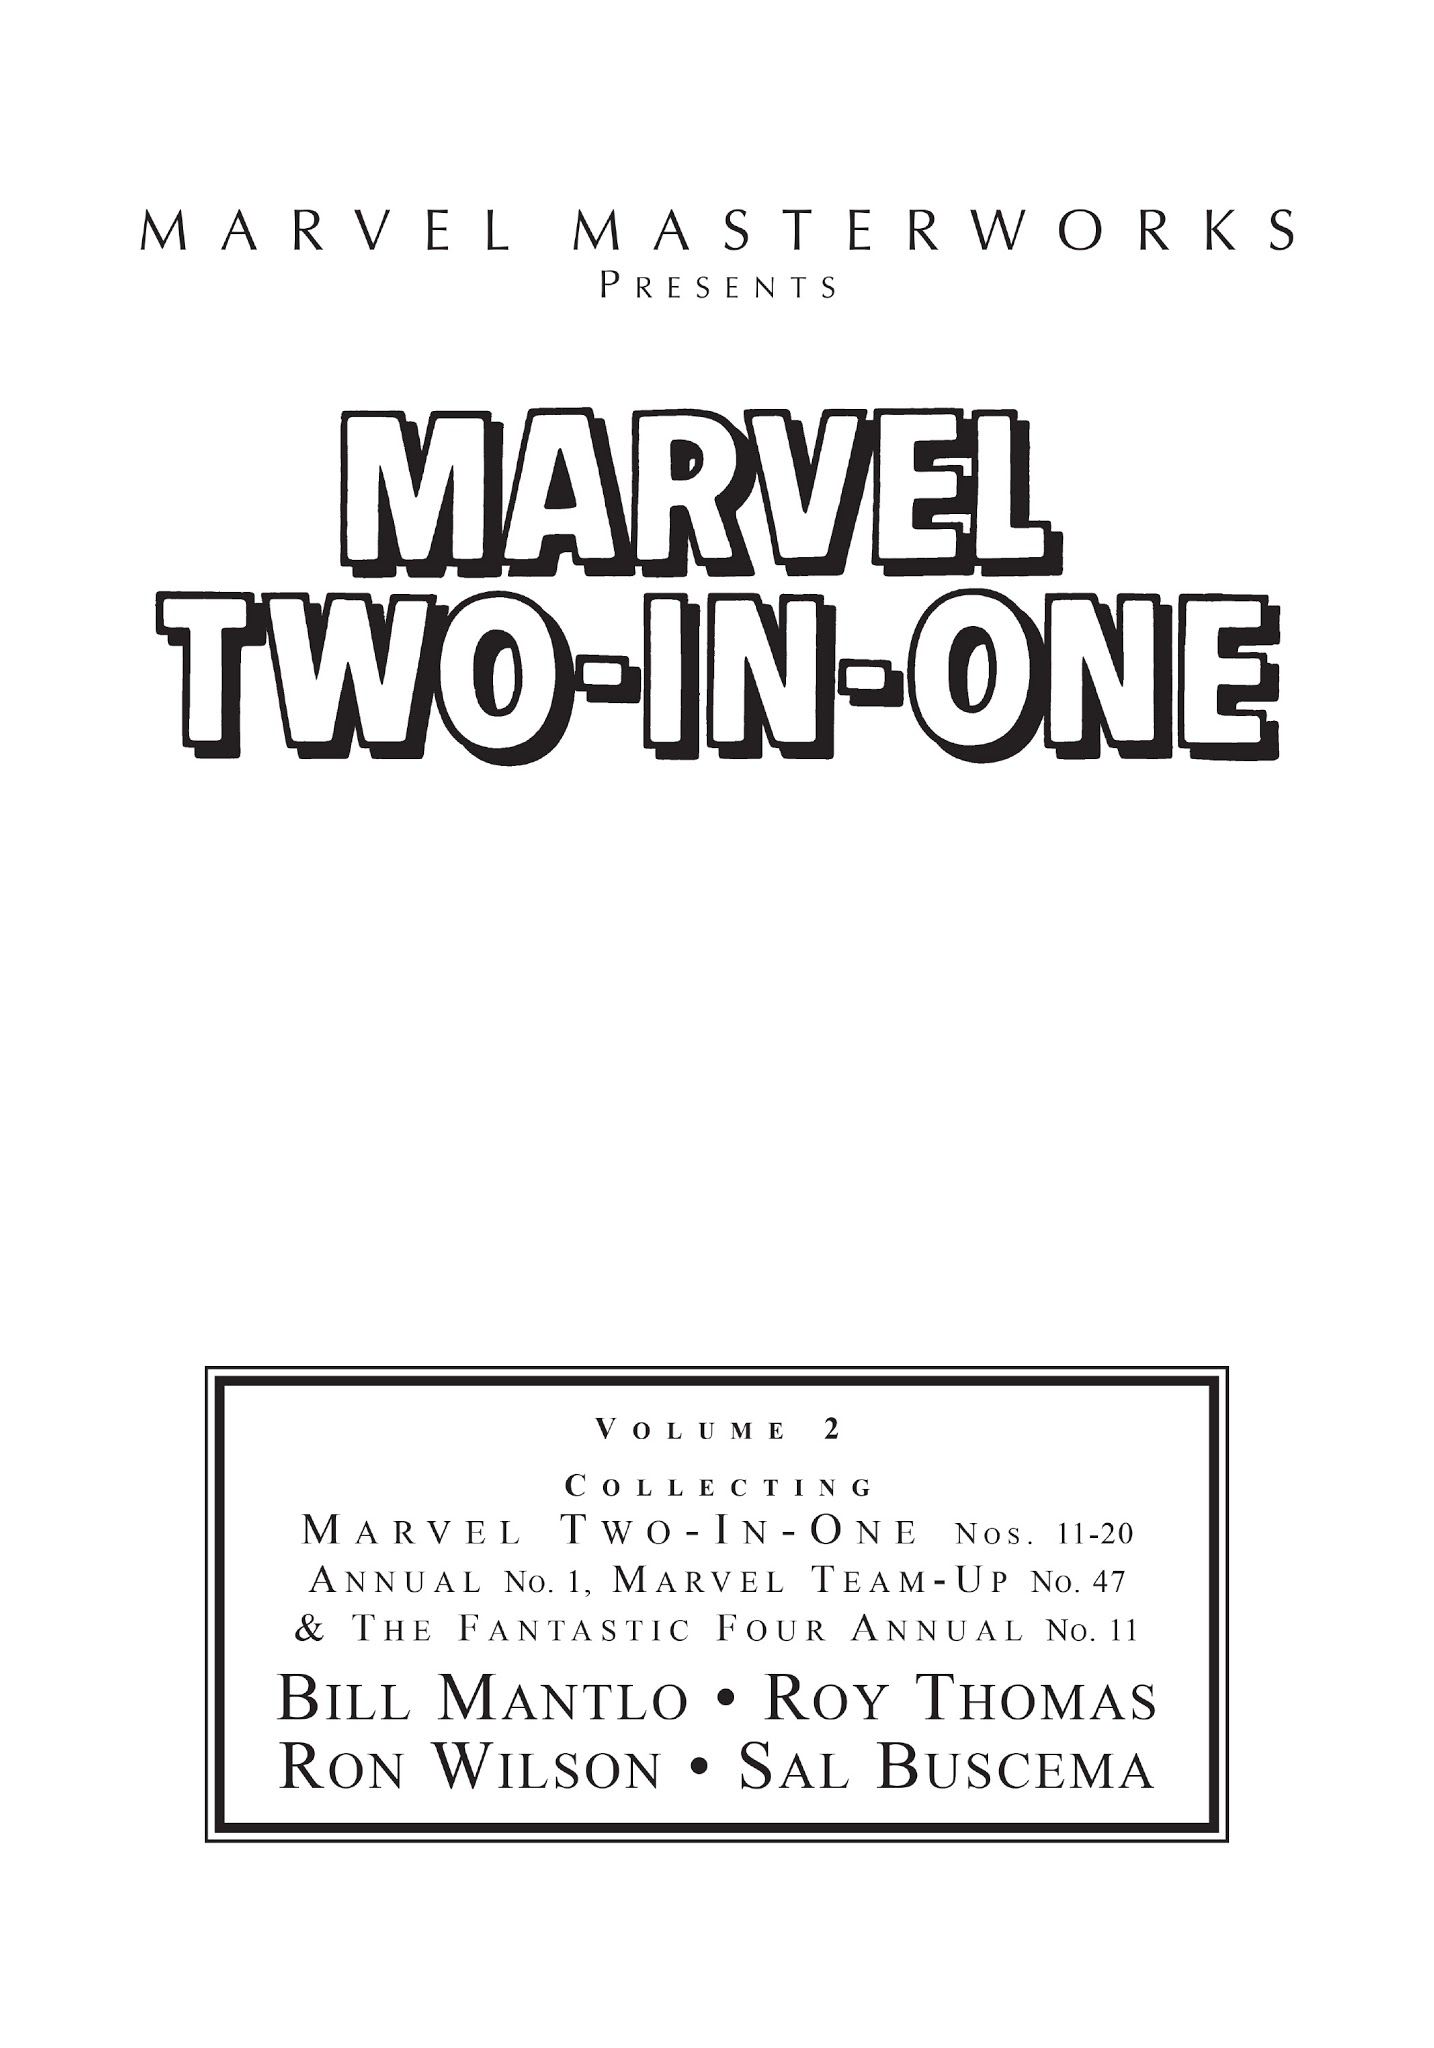 Read online Marvel Masterworks: Marvel Two-In-One comic -  Issue # TPB 2 - 2